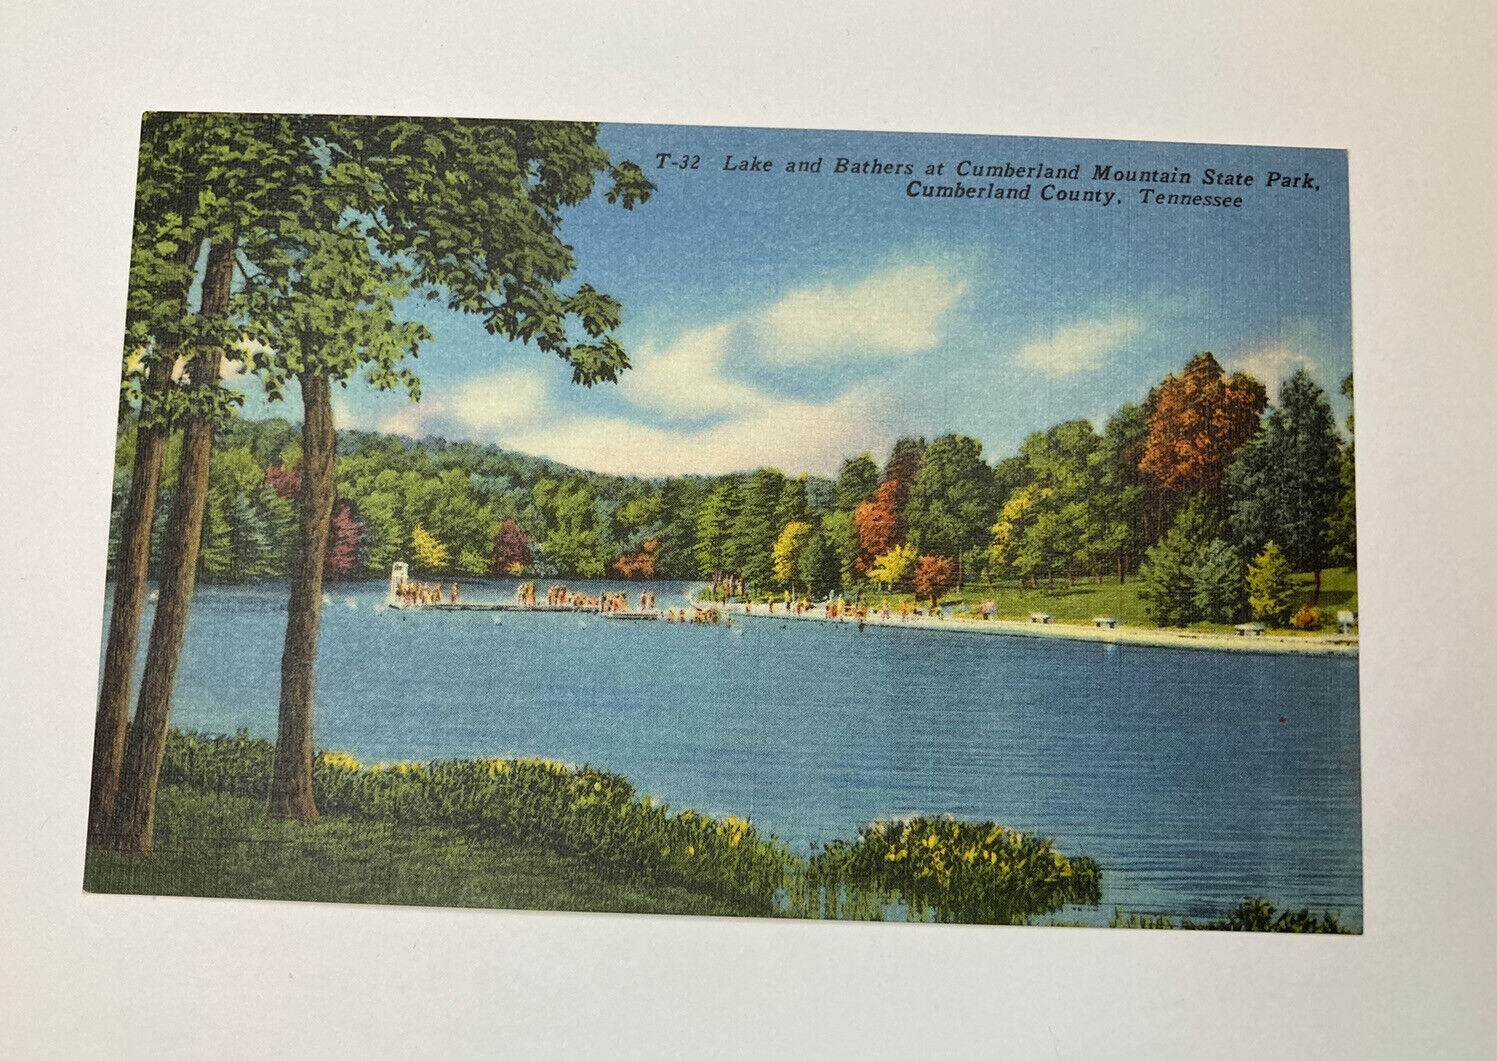 Lake & Bathers At Cumberland Mountain State Park Tennessee VINTAGE Postcard